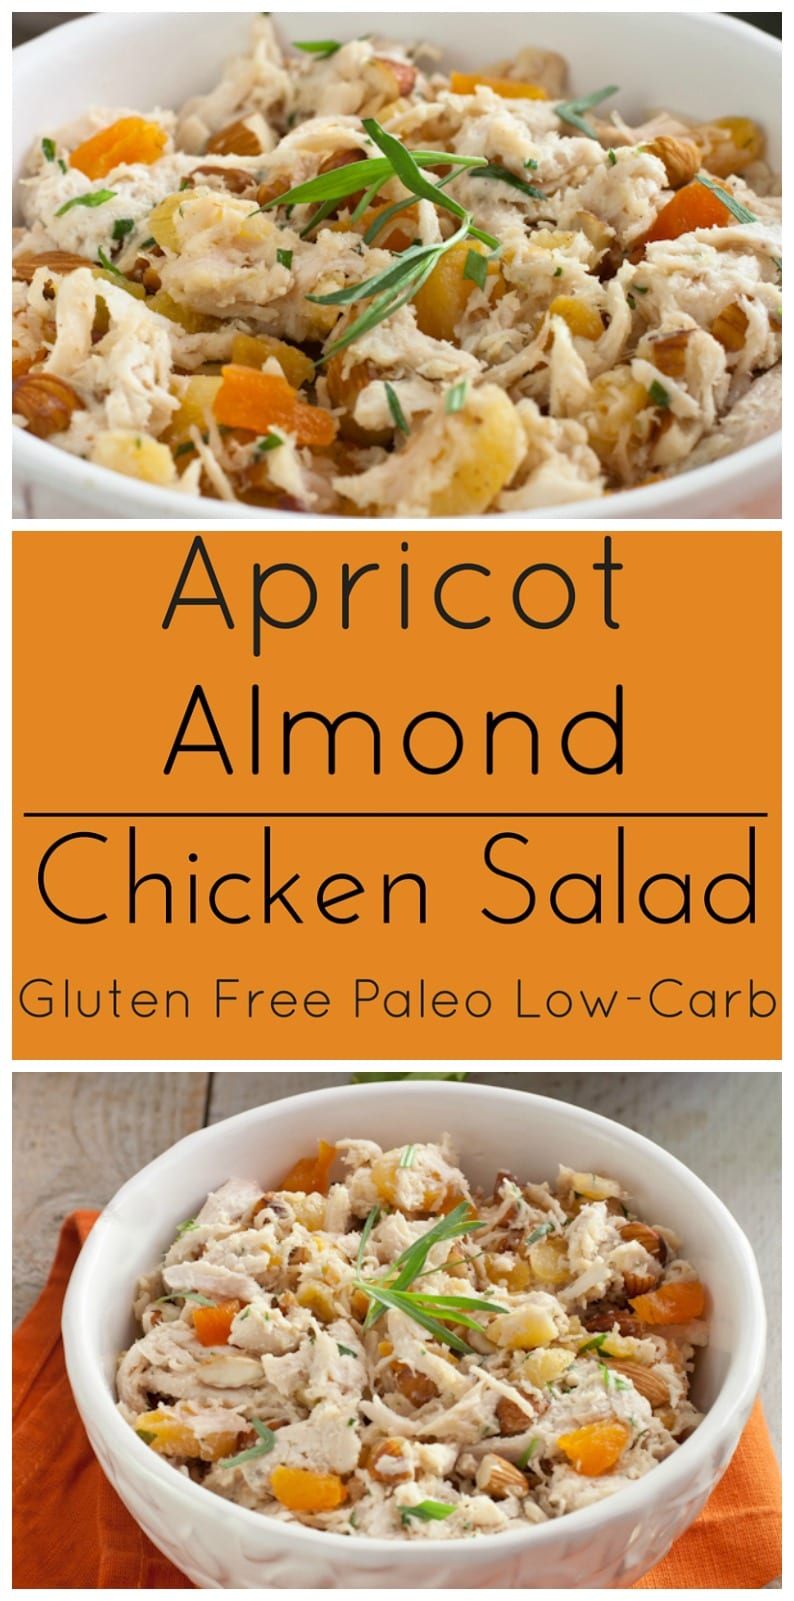 Delicious Chicken Salad with Apricots, Almonds and Tarragon. Gluten free, paleo and low-carb!